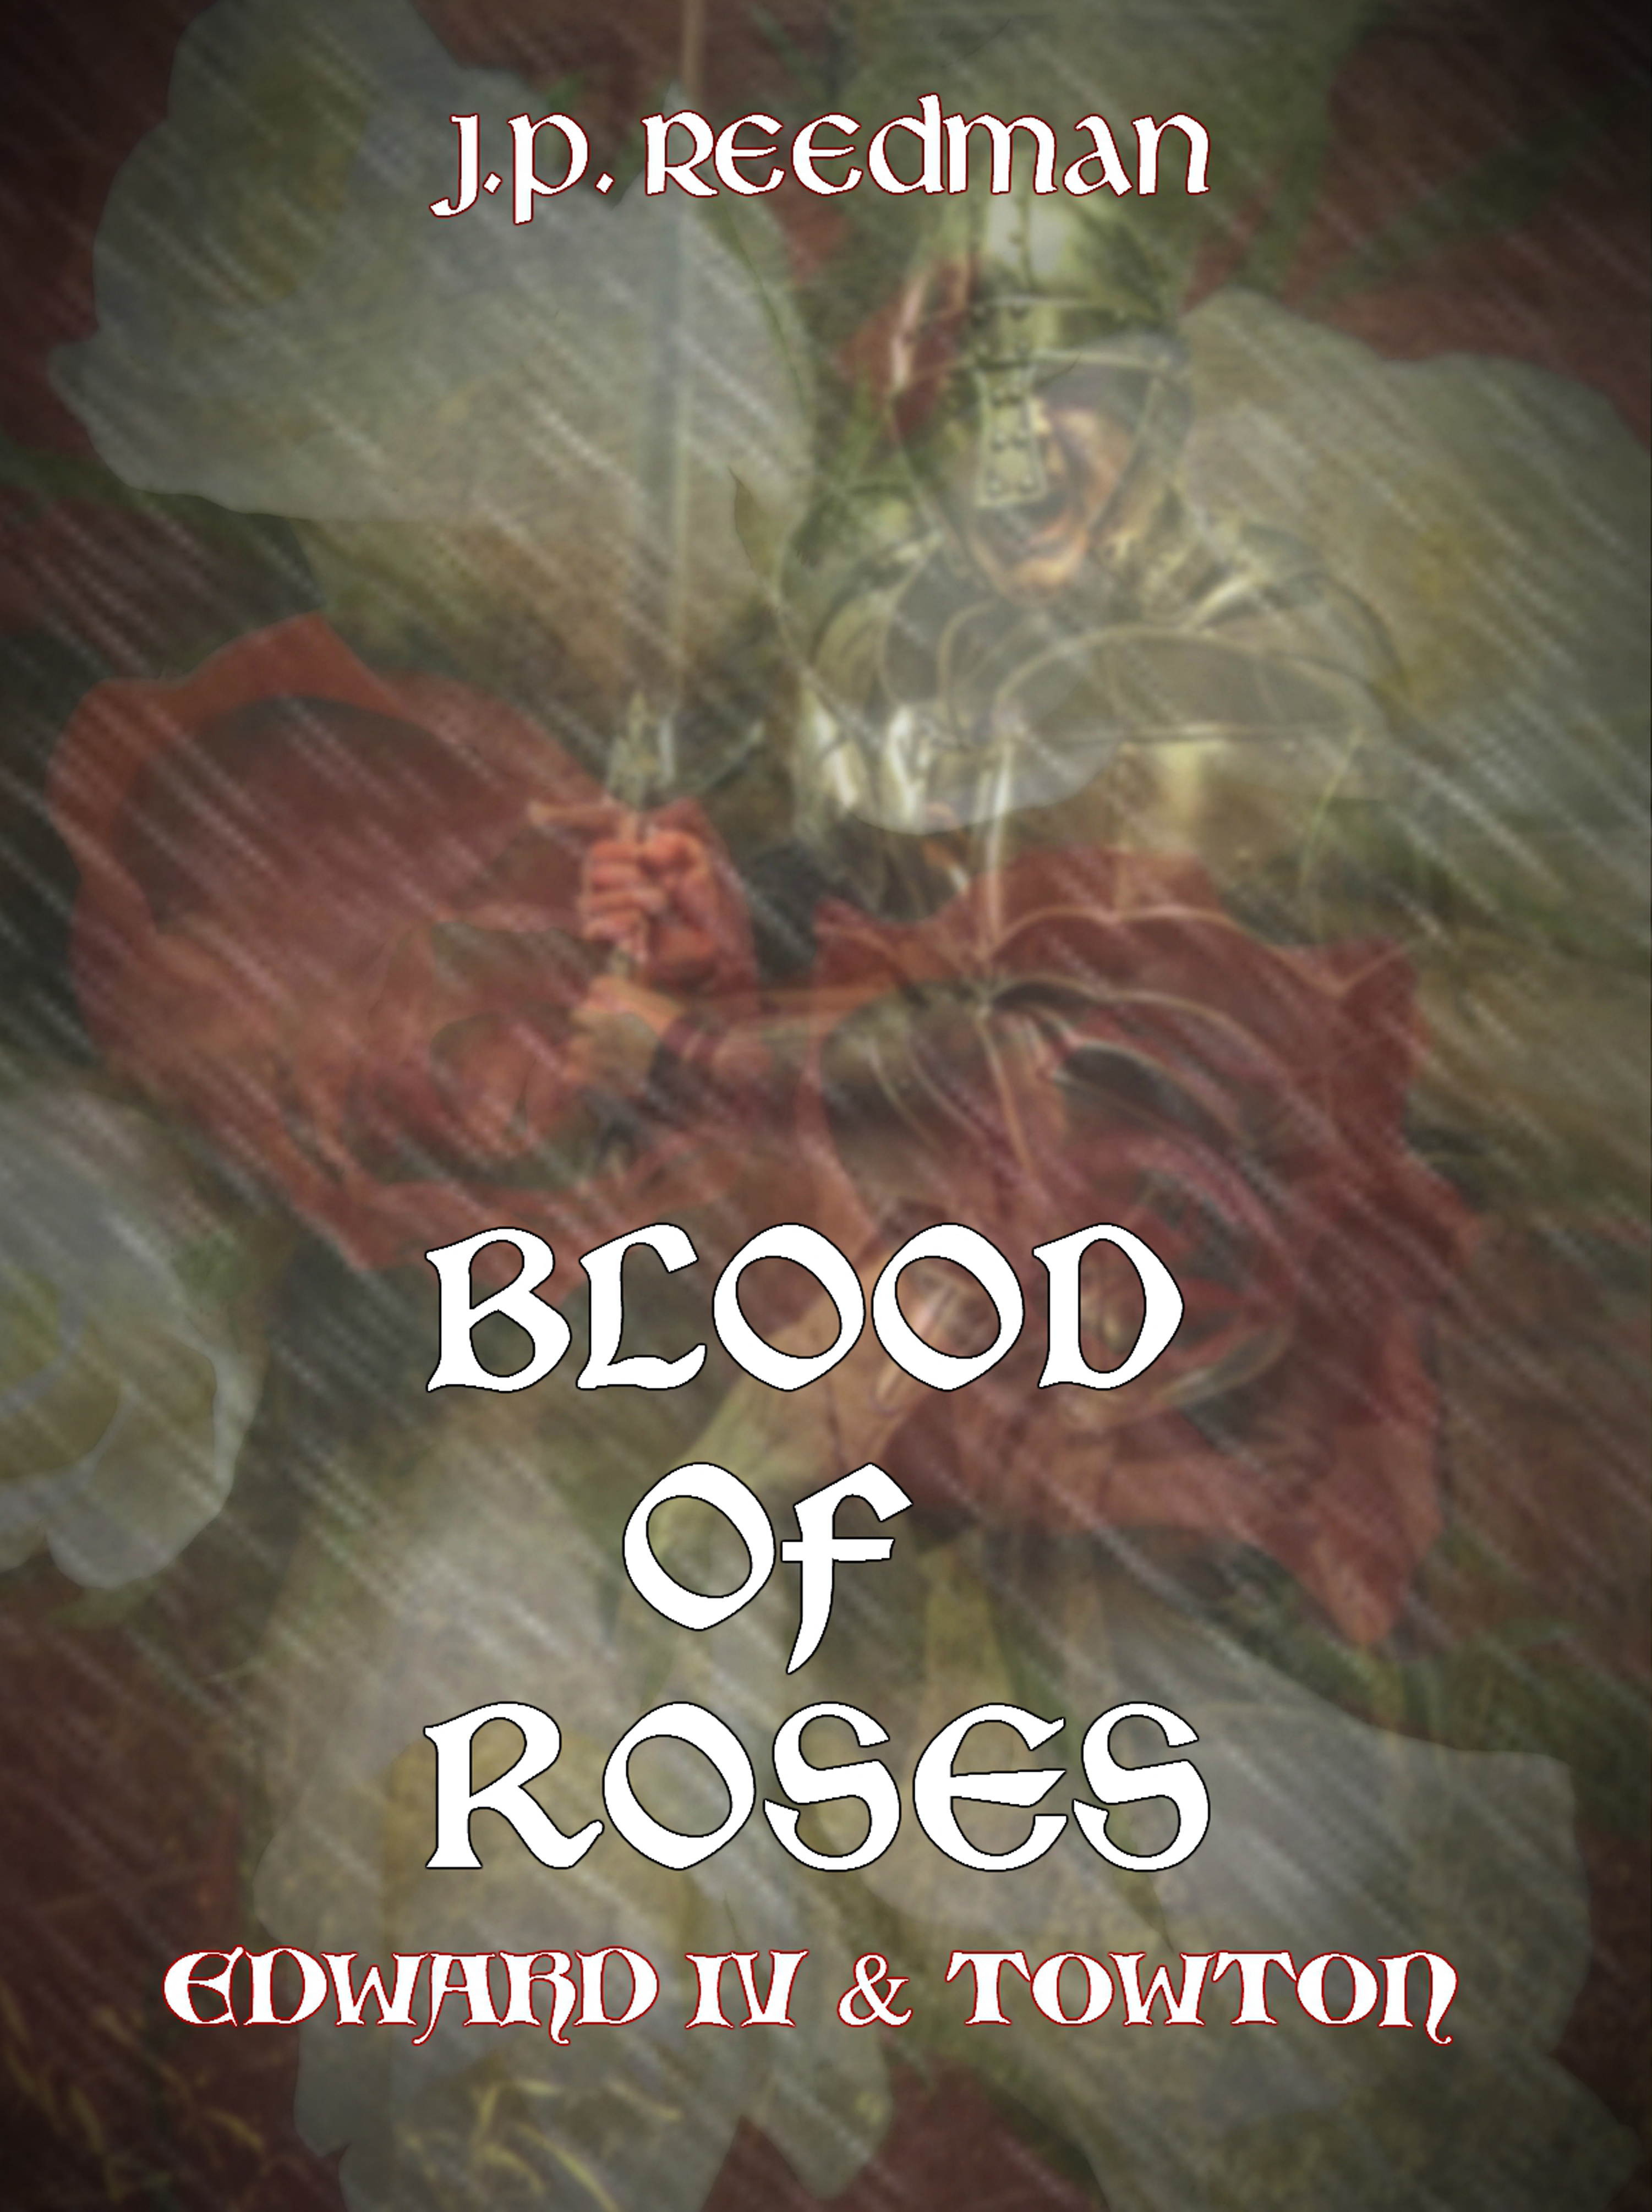 FREE: BLOOD OF ROSES; EDWARD IV & TOWTON by J. P. Reedman